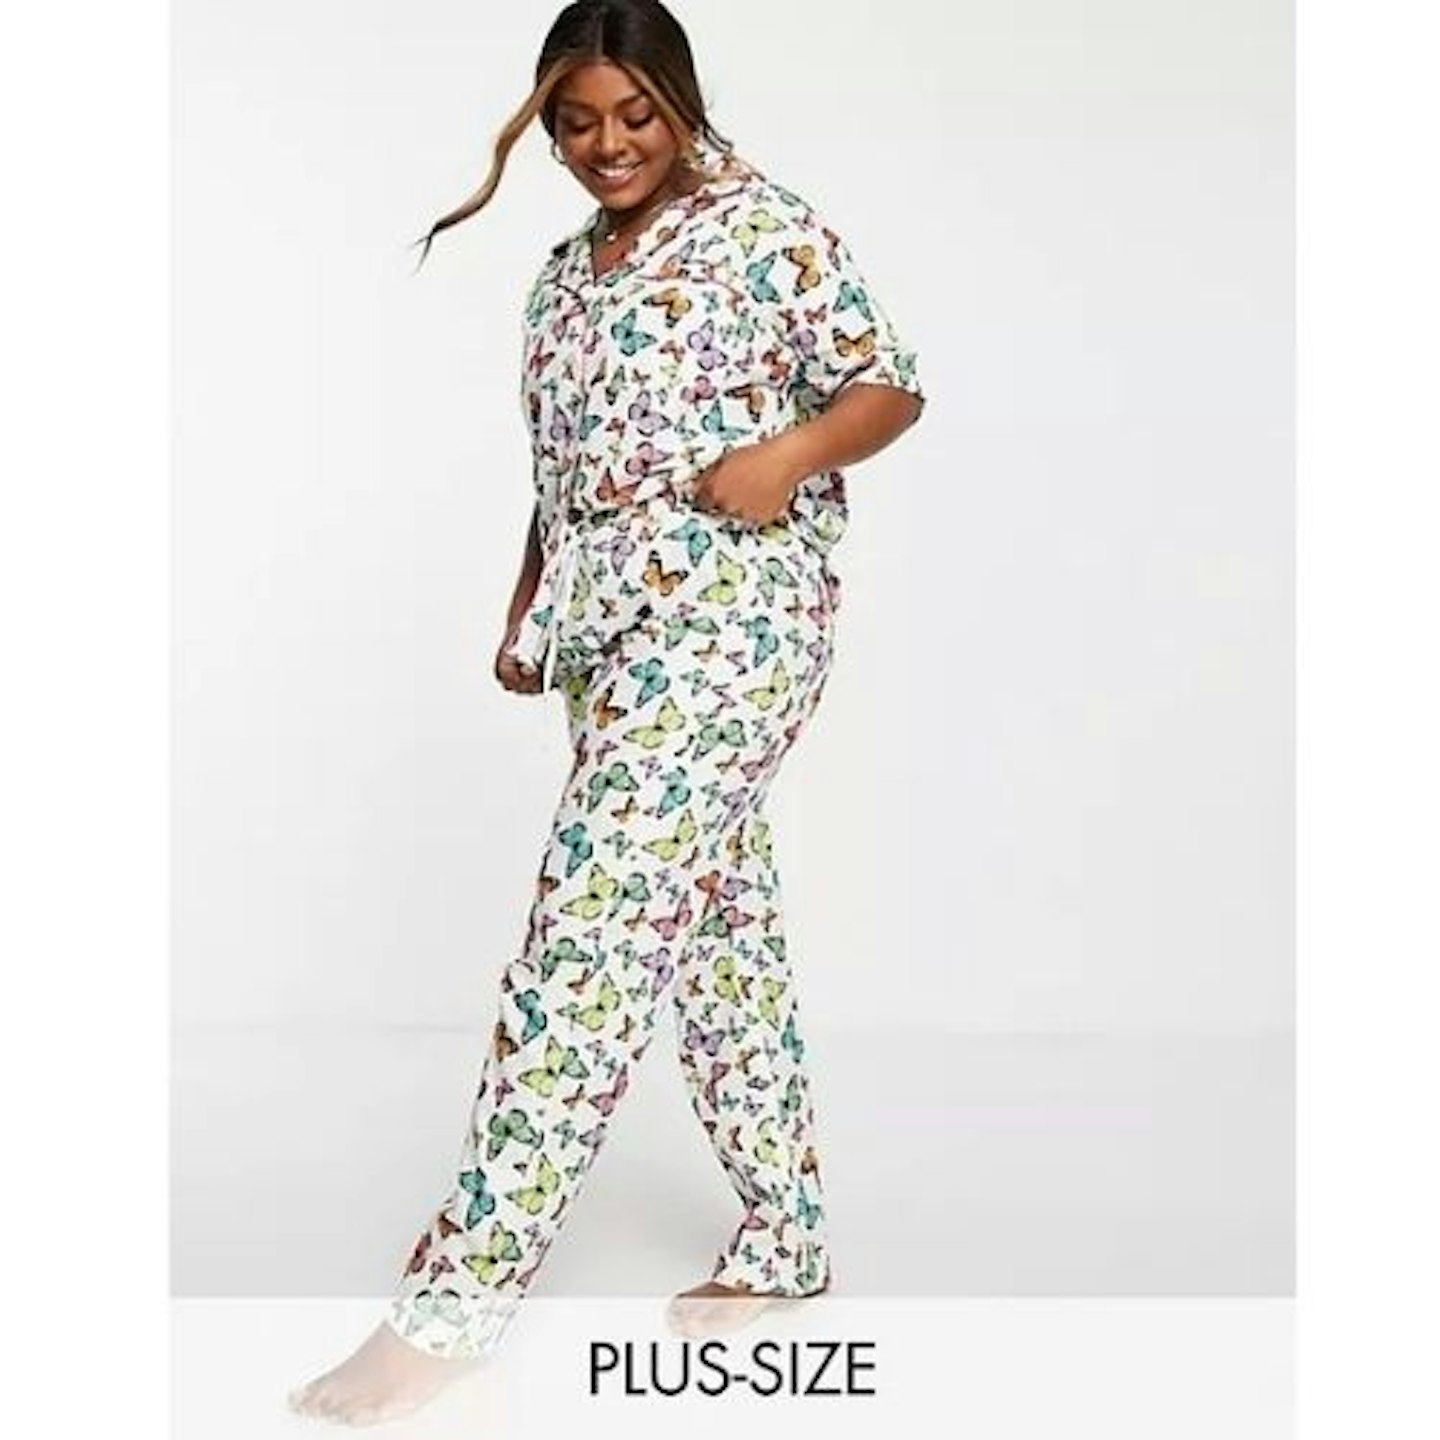 Daisy Street Plus short sleeve shirt and pyjama bottoms set with scrunchie in bright butterfly print